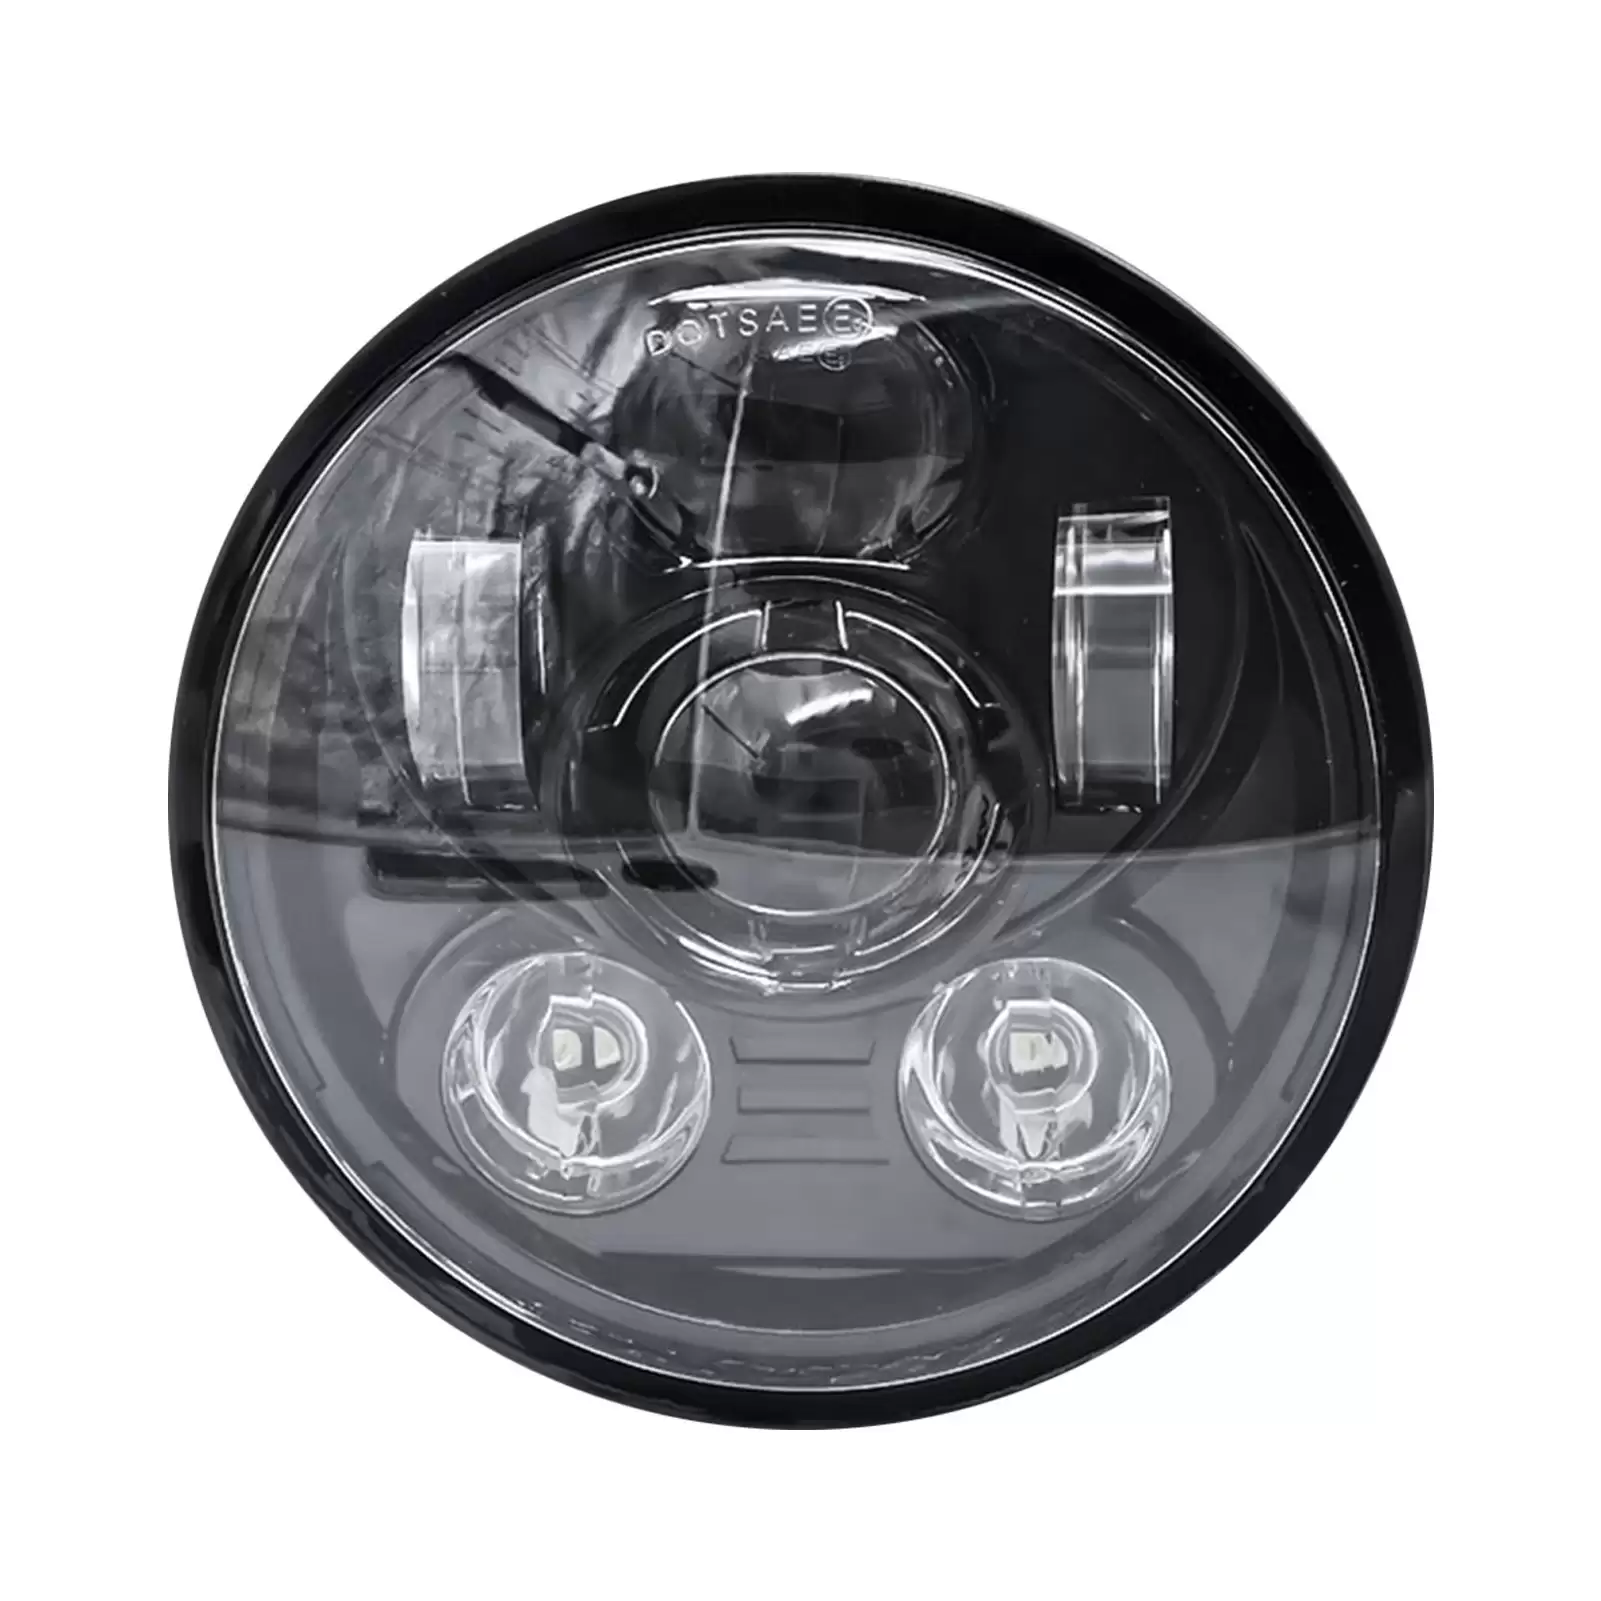 Pay Only $22.31 For 5.75 Inch Motorcycle Led Headlight With High Low Beam White Light With This Discount Coupon At Tomtop